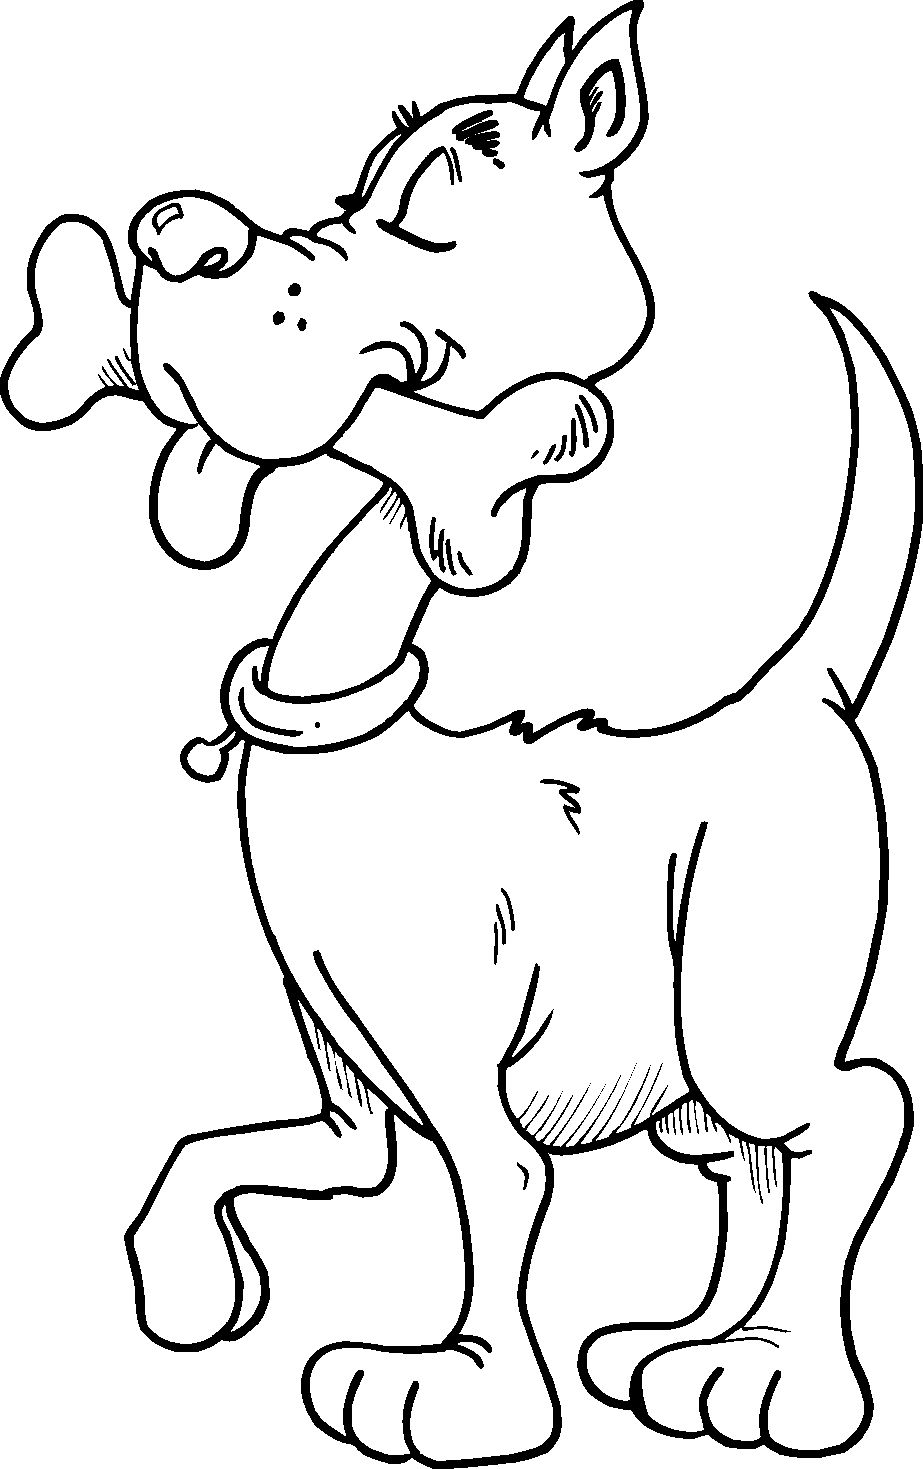 coloring pages cartoons cartoon animal coloring pages to download and print for free pages coloring cartoons 